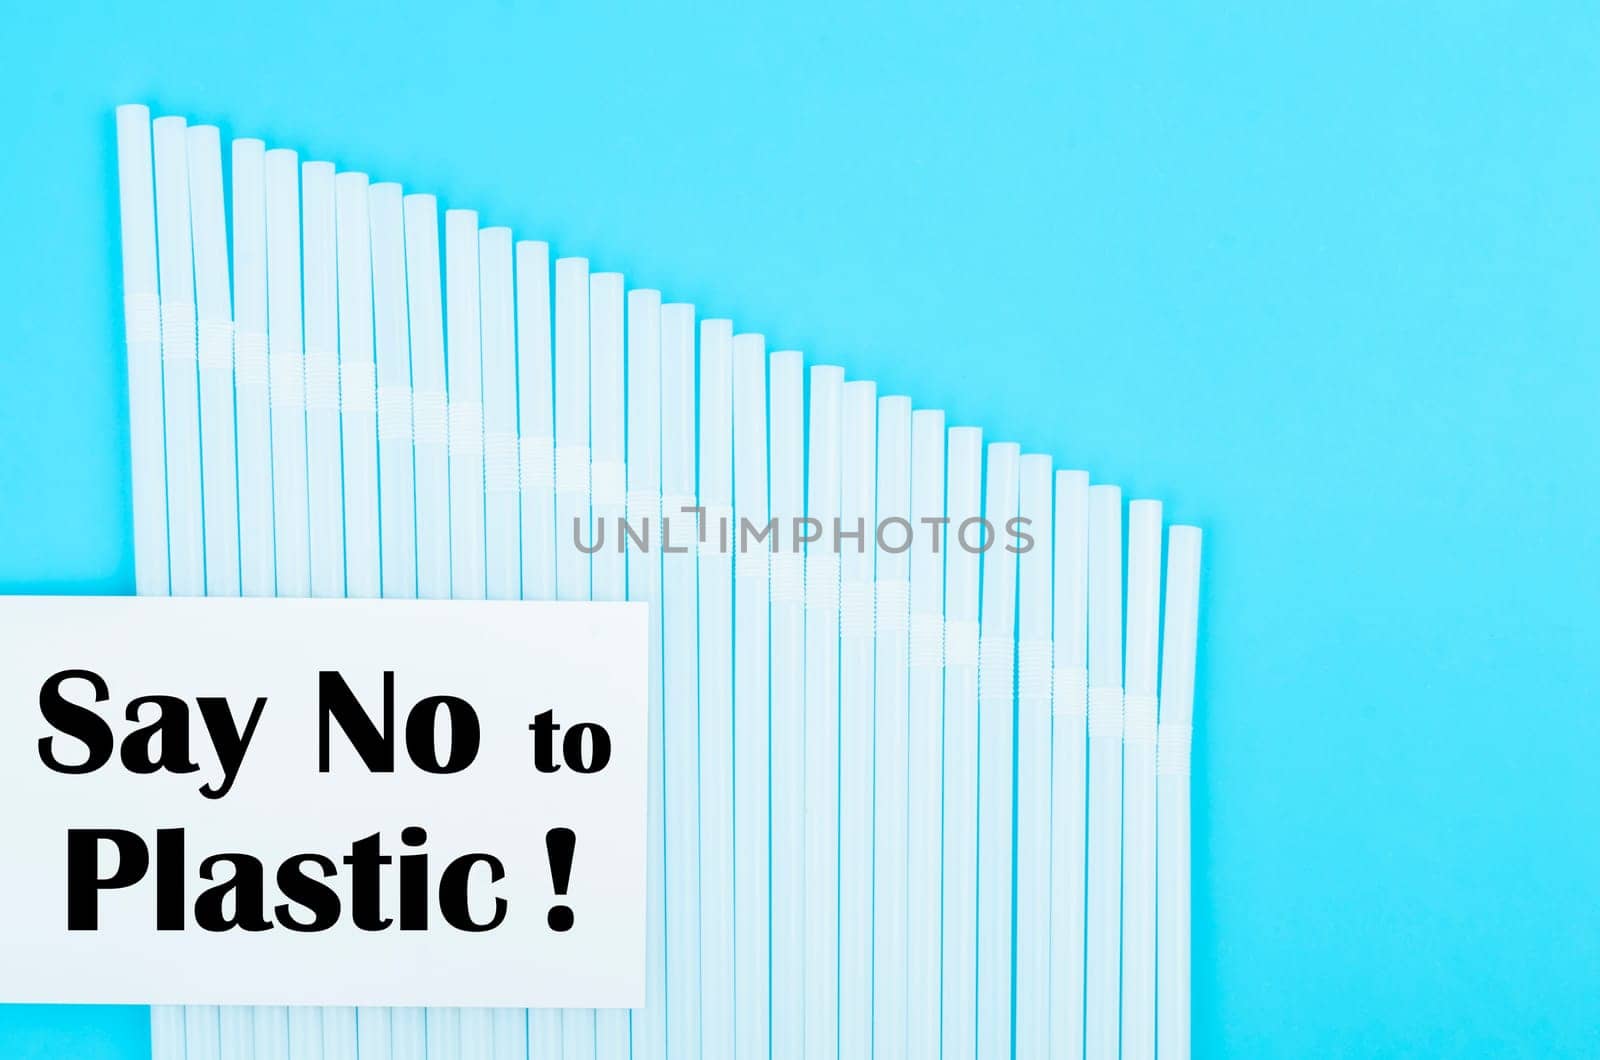 Say no to plastic plastic drinking straws. Garbage Environment pollustion concept.